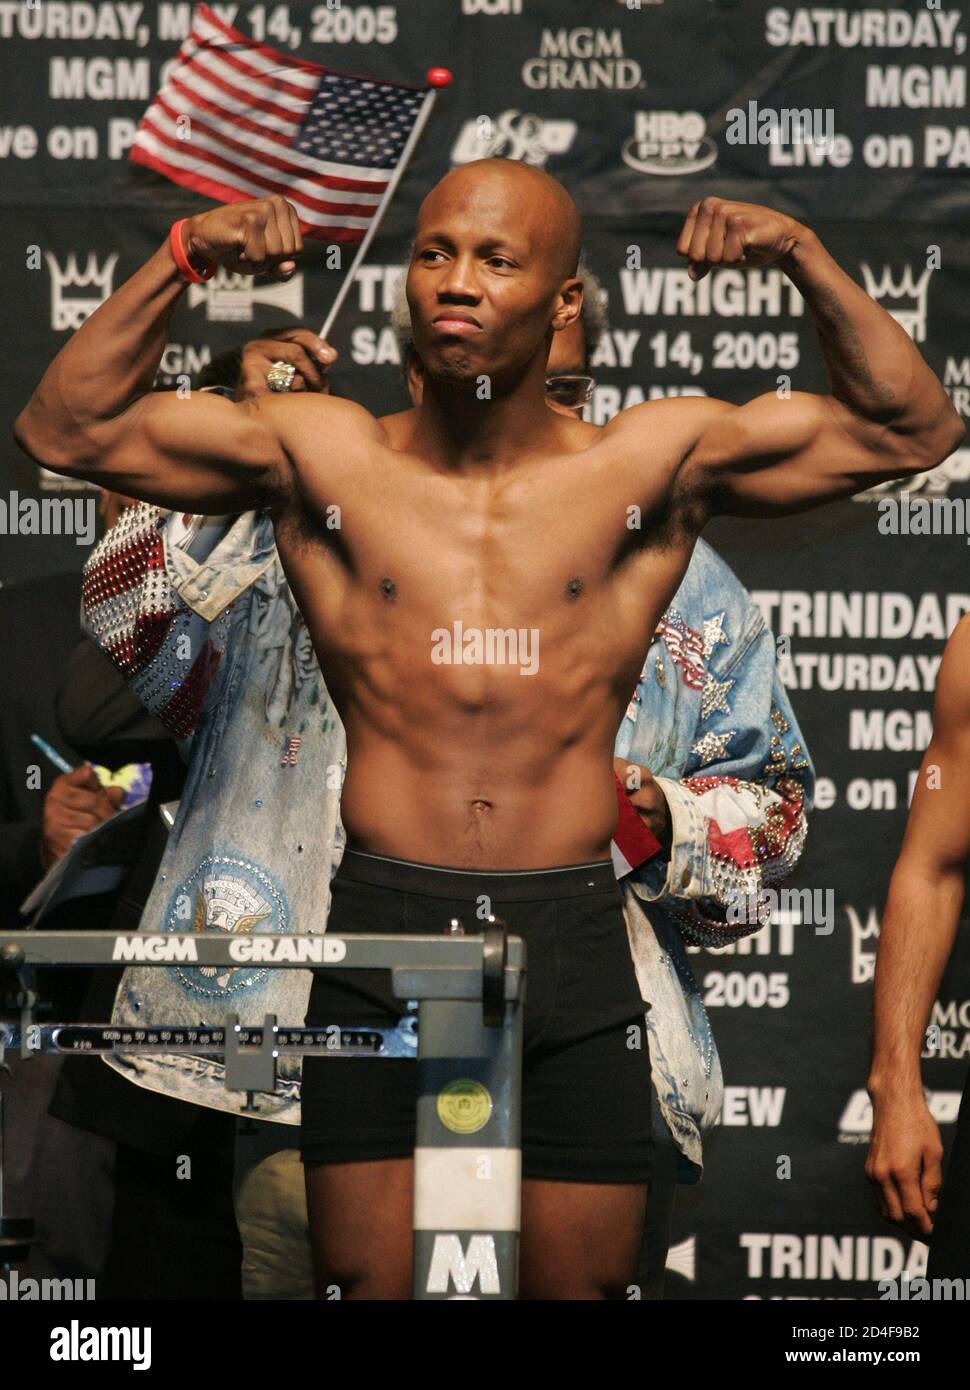 WBC/WBA/IBF welterweight champion Zab Judah of Brooklyn, New York poses on the scale during a weigh-in at the MGM Grand Garden Arena in Las Vegas, Nevada May 13, 2005. Judah (32-2) defends his titles against Cosme Rivera (28-7-2) of Los Angeles, California at the arena May 14. Judah weighed 146.5 pounds. Rivera weighed 146 pounds. REUTERS/Steve Marcus  SM/SV Stock Photo